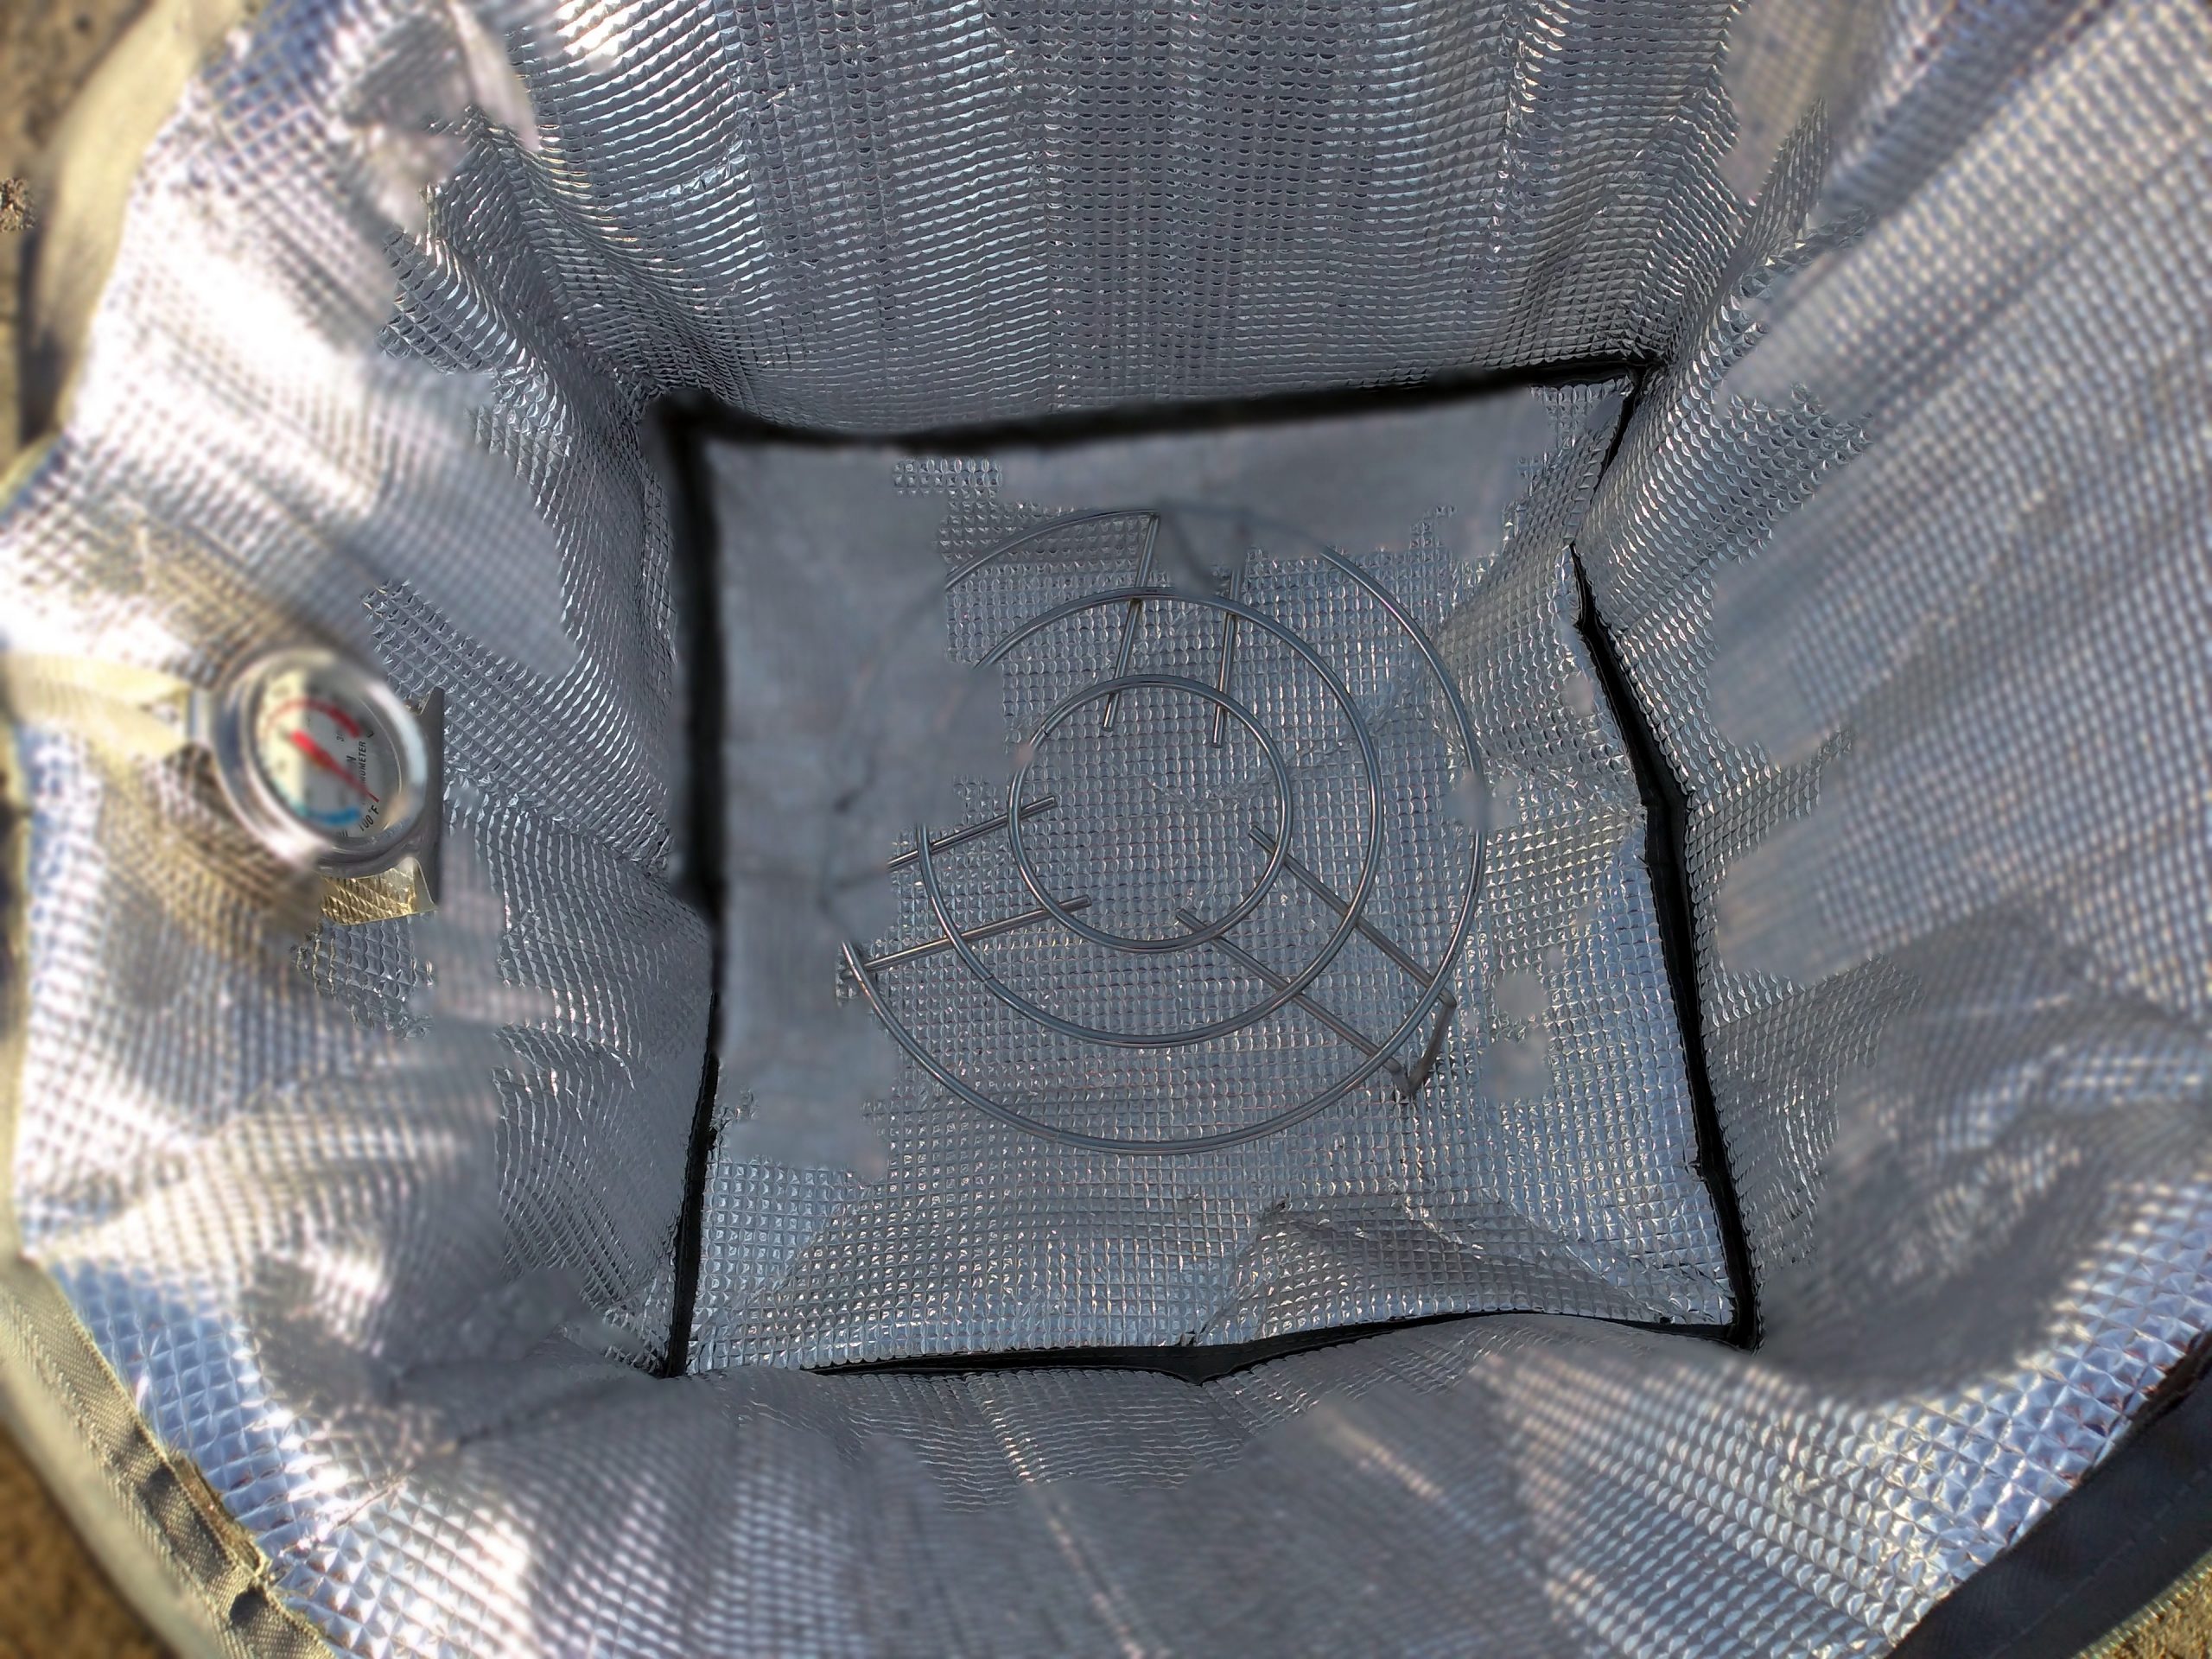 Solar Oven Bag+Cooler in a Carry Bag – Symmetry Company